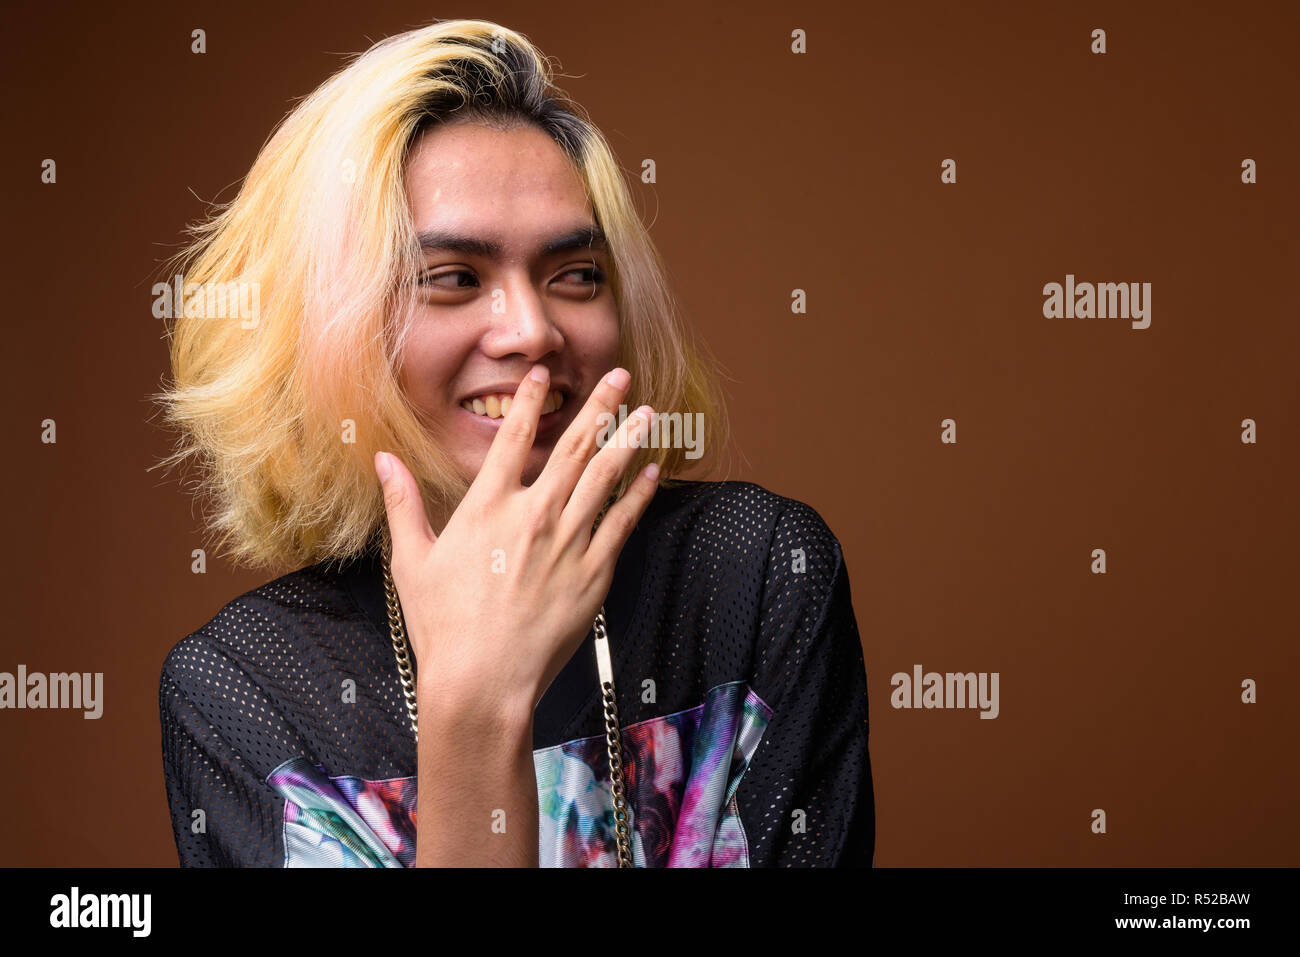 Young Asian man laughing and covering mouth Stock Photo